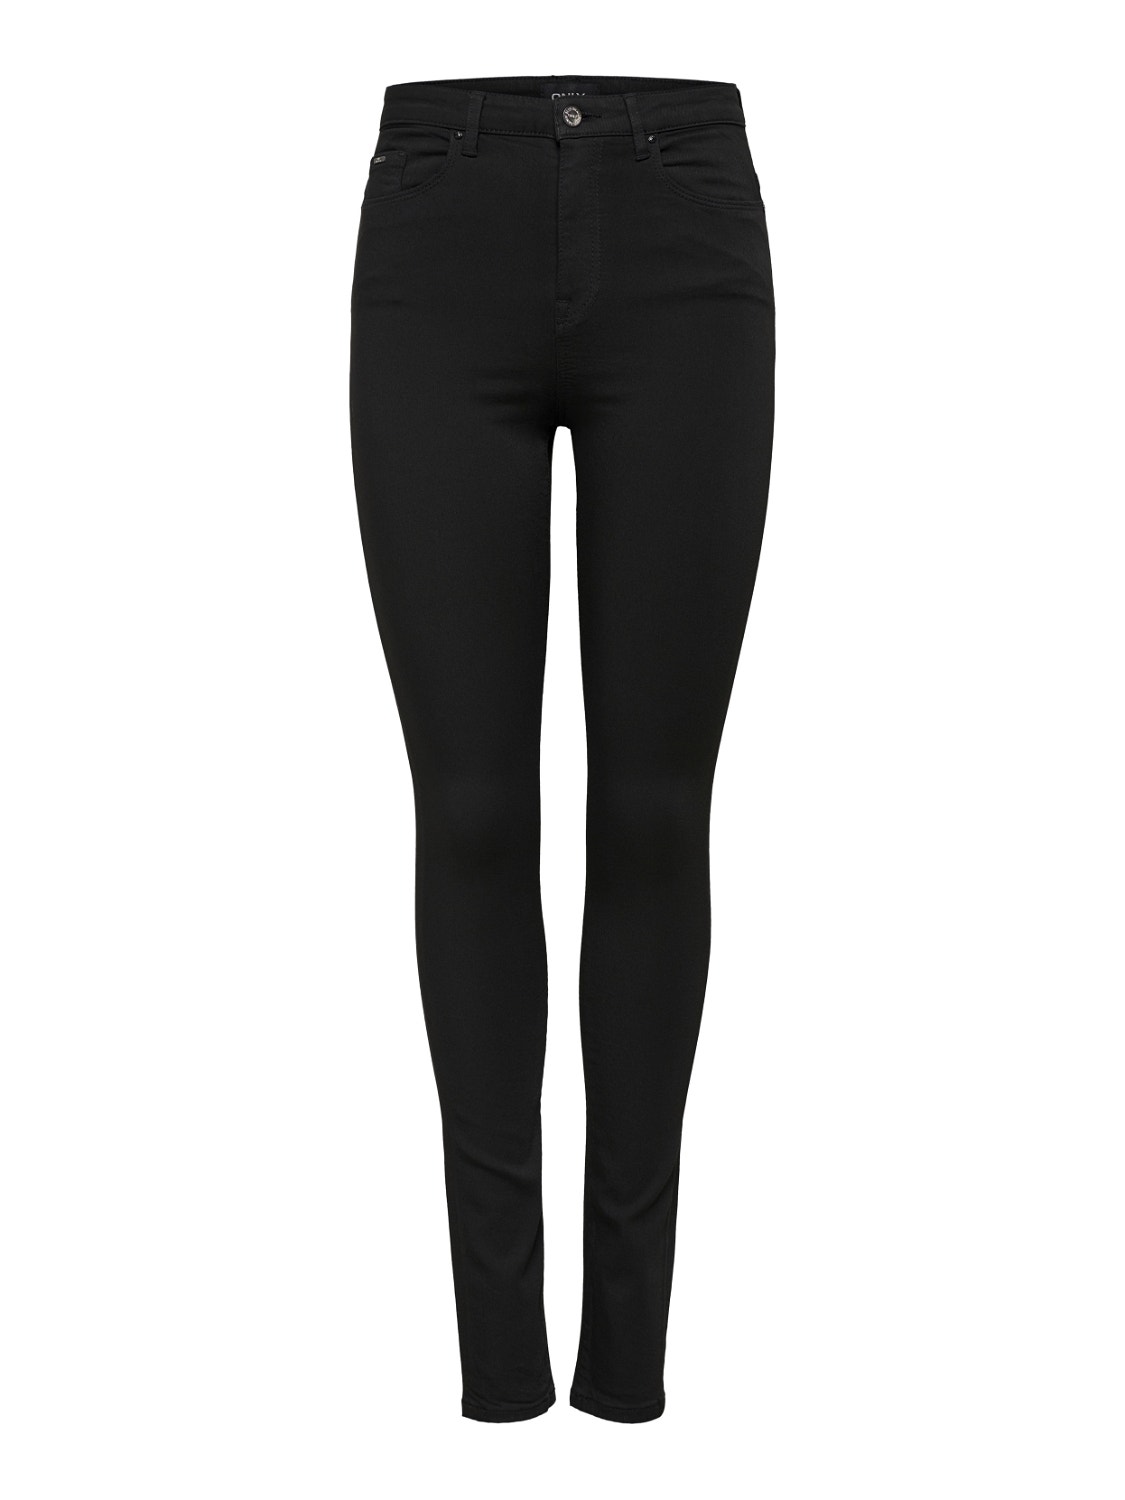 ONLY Skinny Fit Hohe Taille Jeans -Black Denim - 15184928